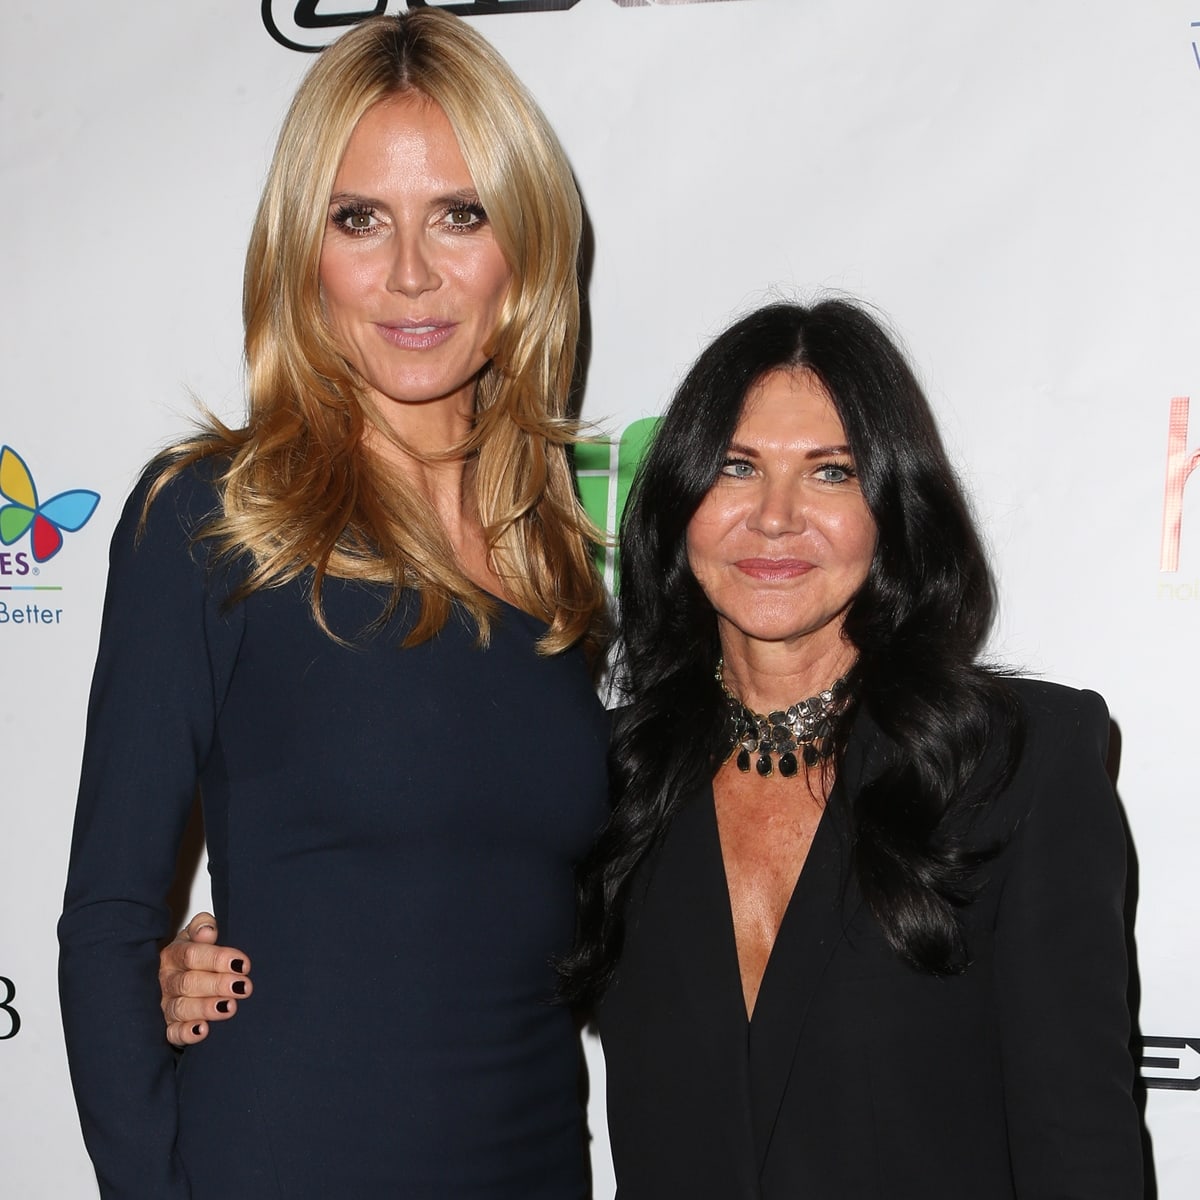 Heidi Klum's hairstylist Wendy Iles was the winner of the Kathryn Blondell award for hairstyling at the Hollywood Beauty Awards